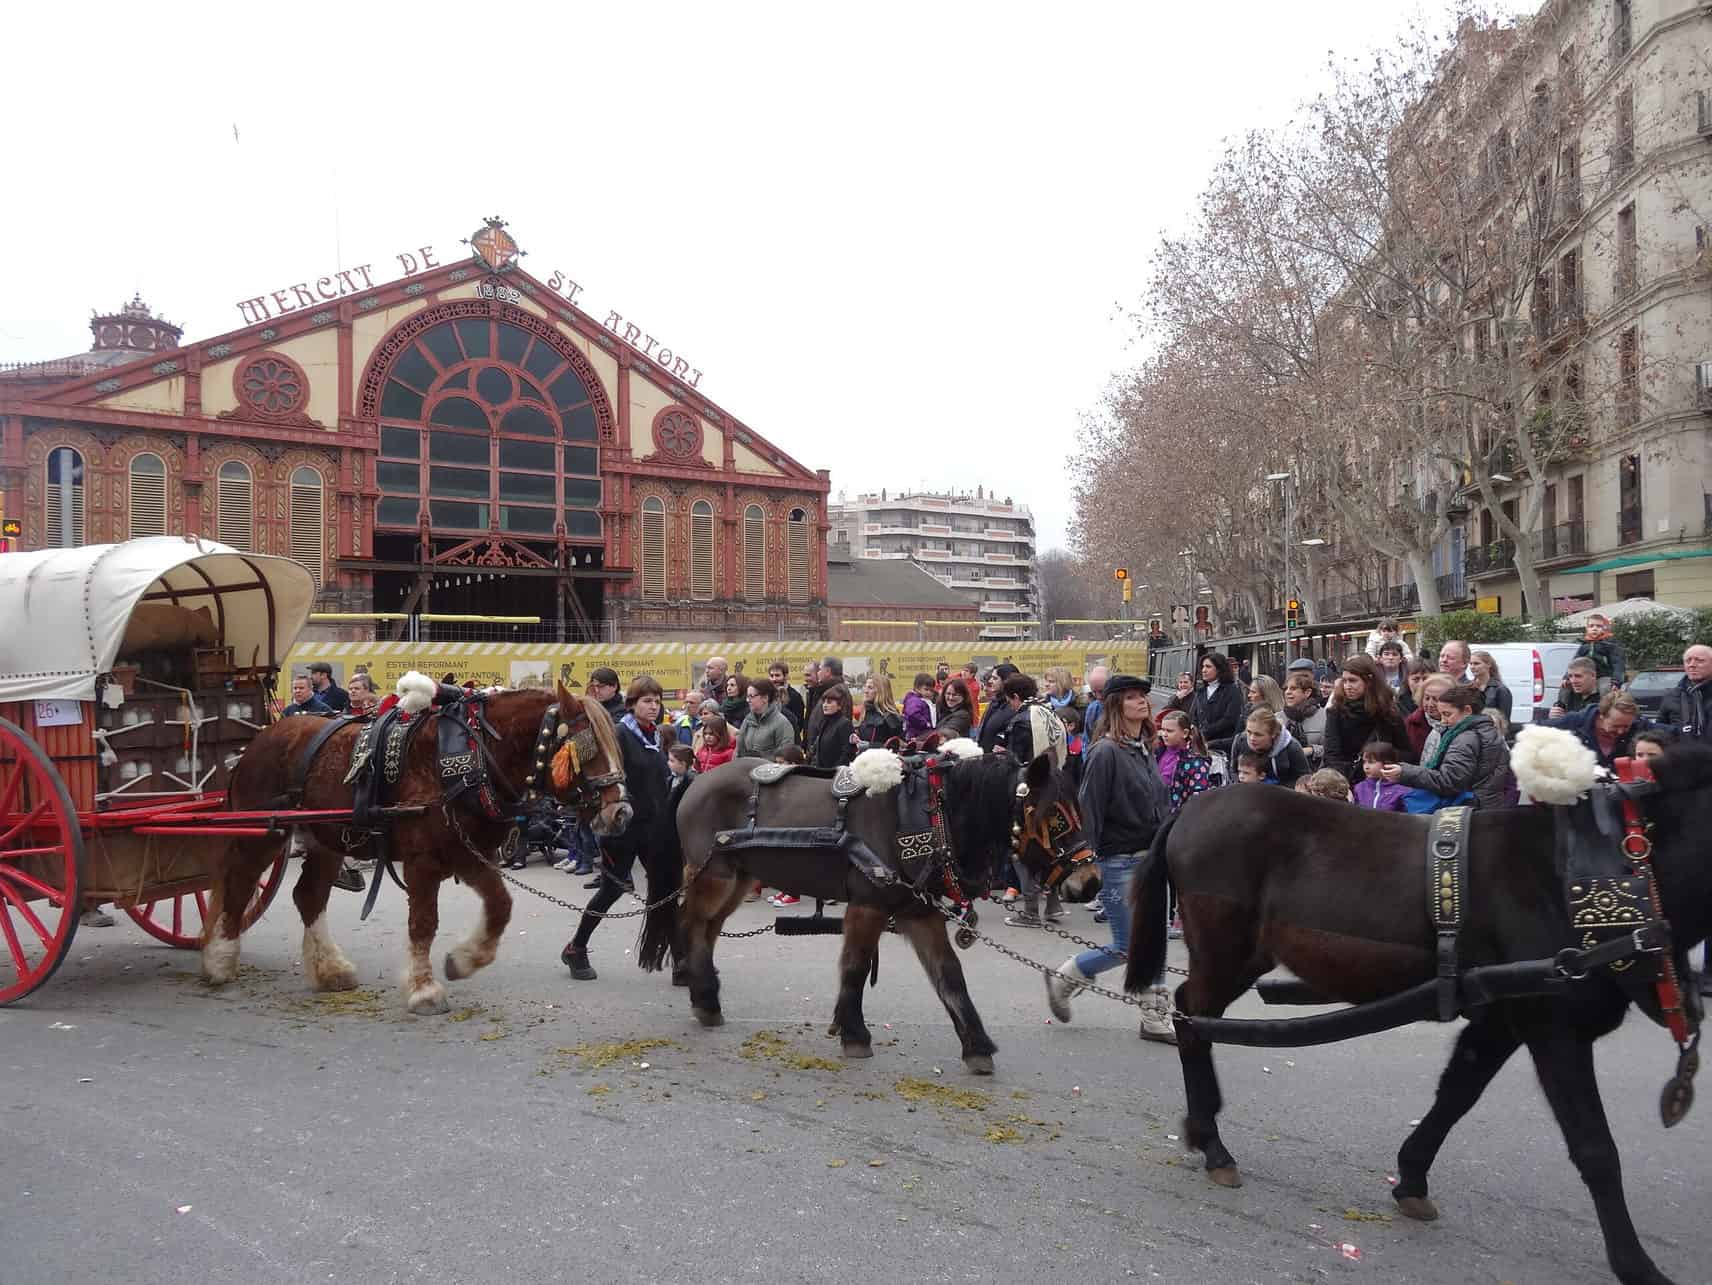 Attend the Festa Dels Tres Tombs on January 17th